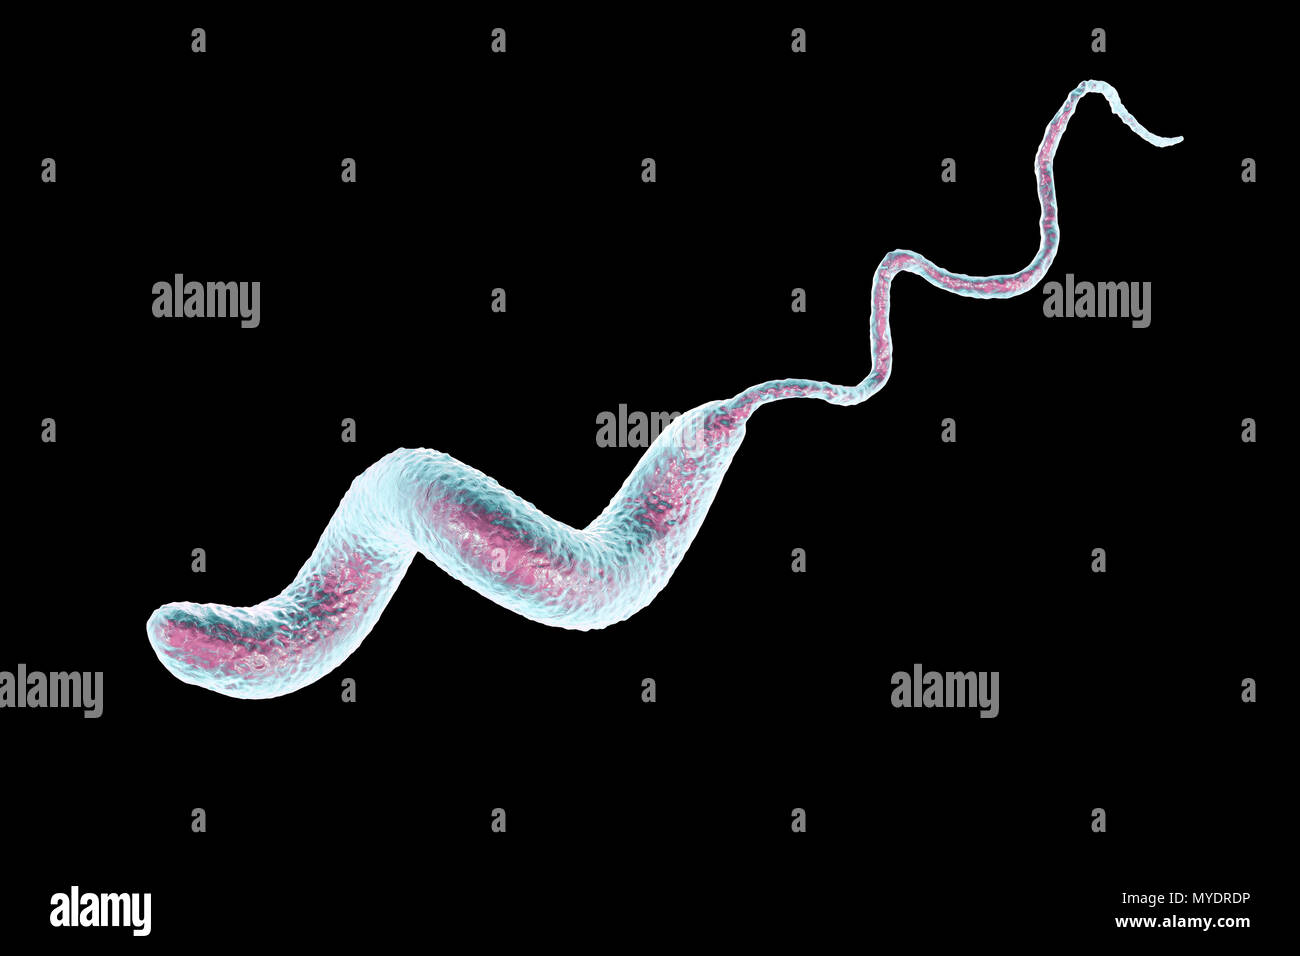 Campylobacter jejuni bacterium, computer illustration. This motile, Gram-negative bacterium possesses a long flagella at one end that is uses for locomotion. It can grow in environments where little oxygen is present. It is a common cause of gastroenteritis in humans, especially children and young adults. Contaminated poultry, meat and milk are sources of infection. Symptoms include fever and acute abdominal pain, followed by watery and often bloody diarrhoea. Recovery is usually rapid. Stock Photo